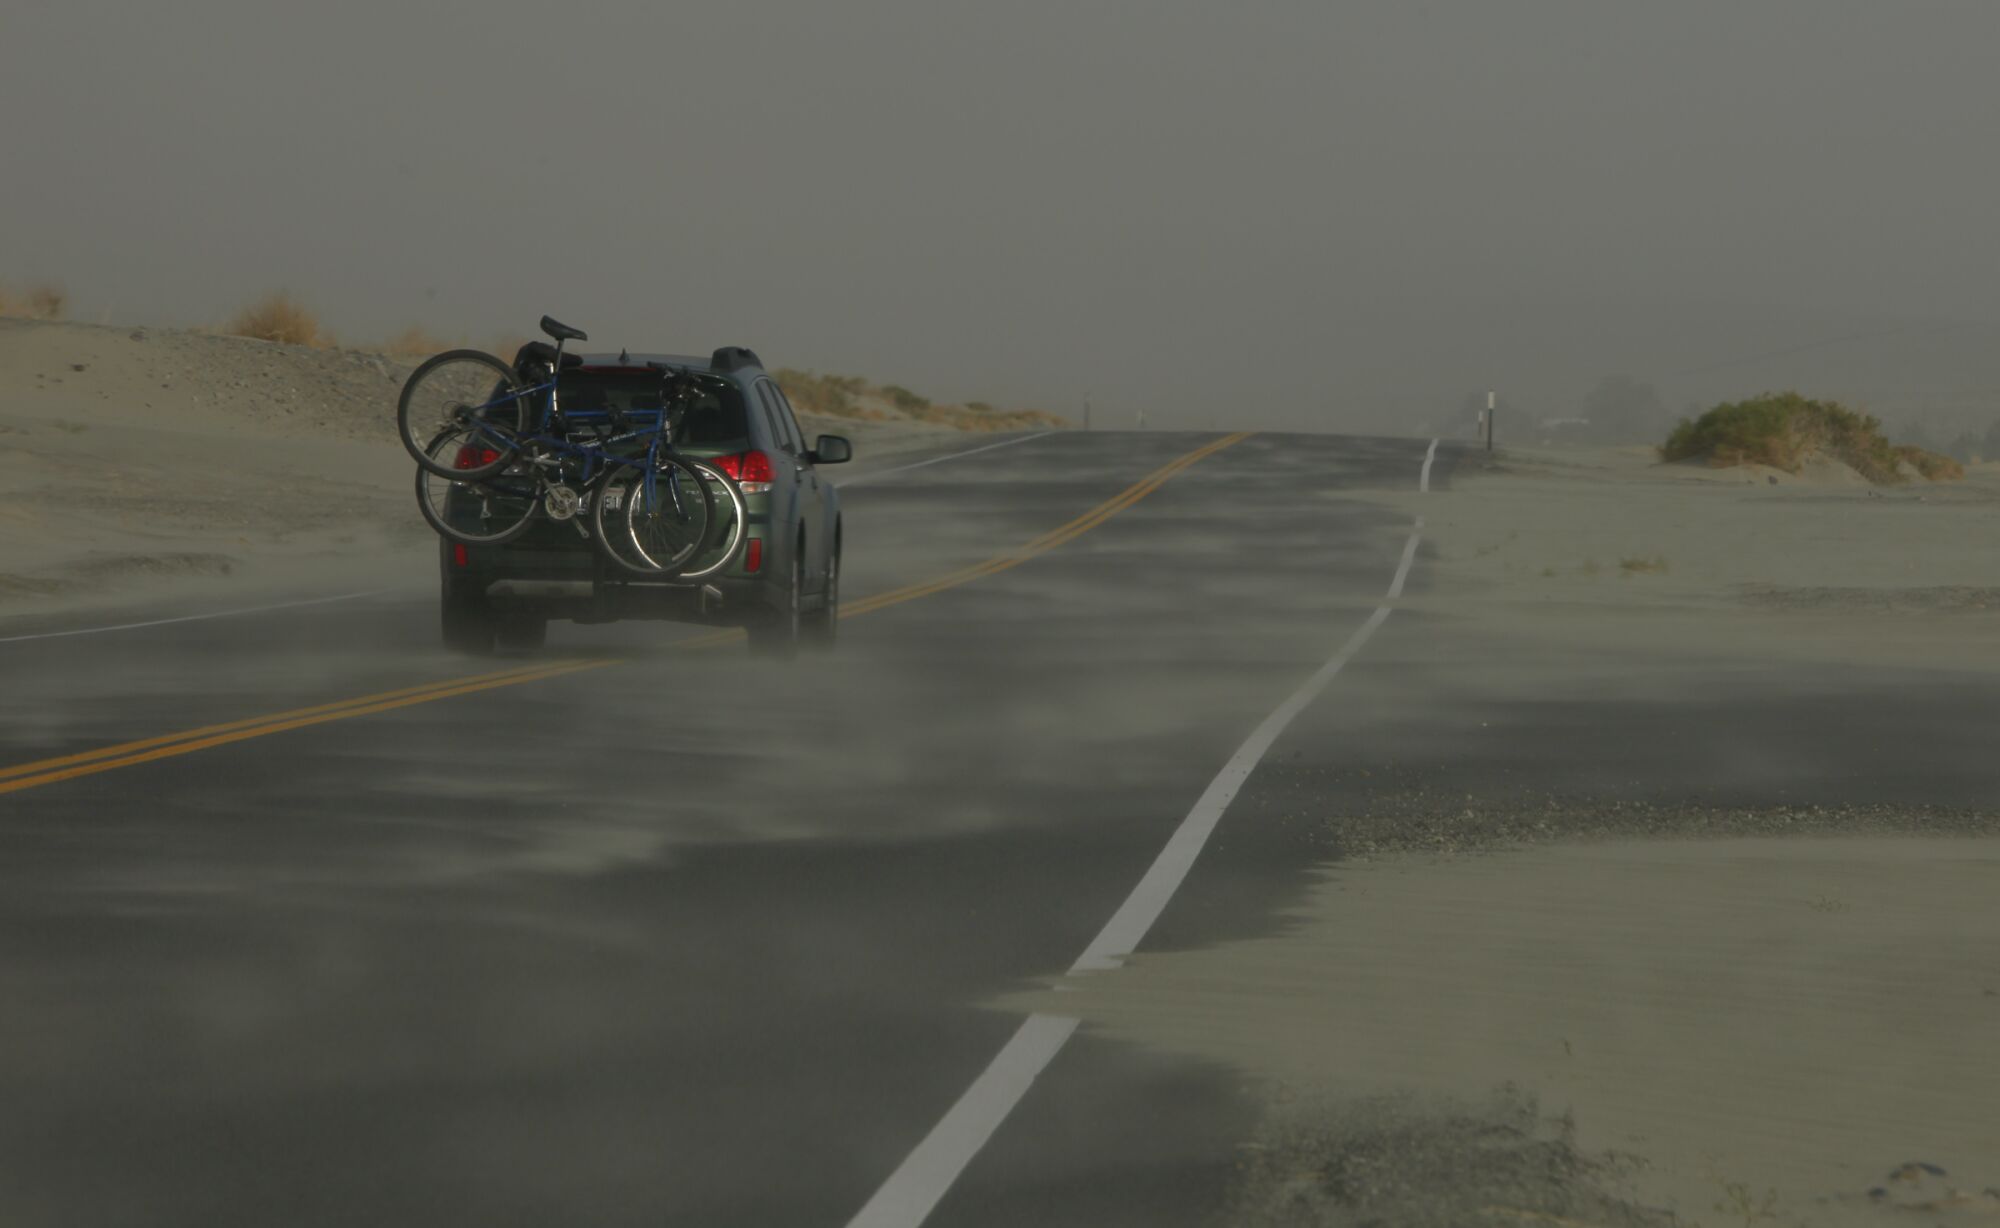 The roadway along the old Route 136 toward Keeler, California is obscured by drifting dust.